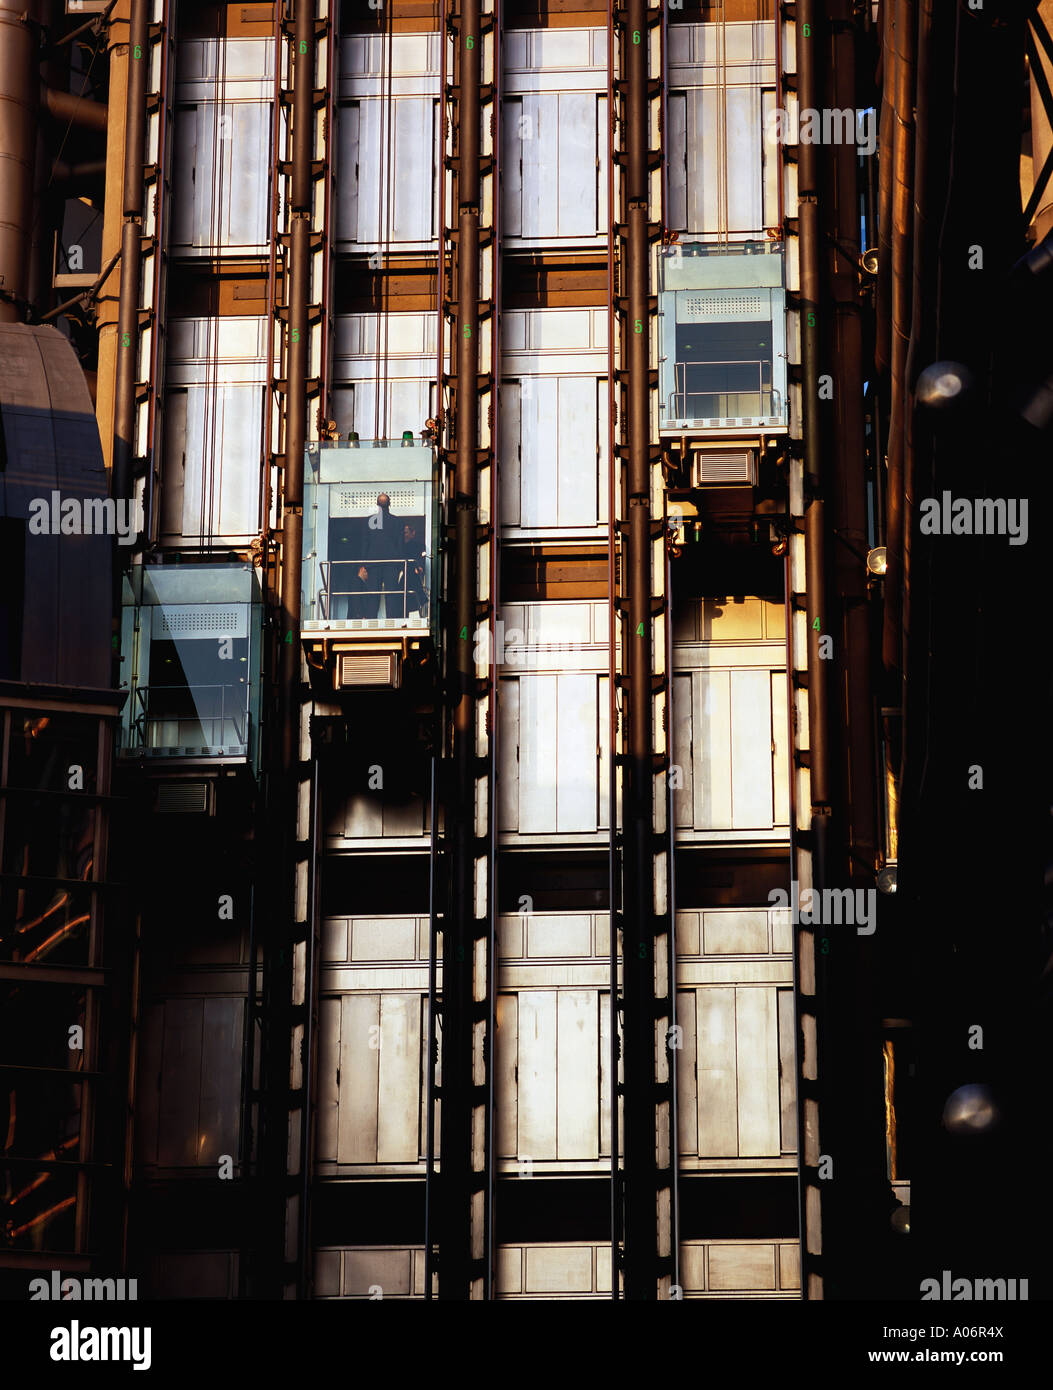 External lifts at the Lloyds Building Lime Street London Stock Photo